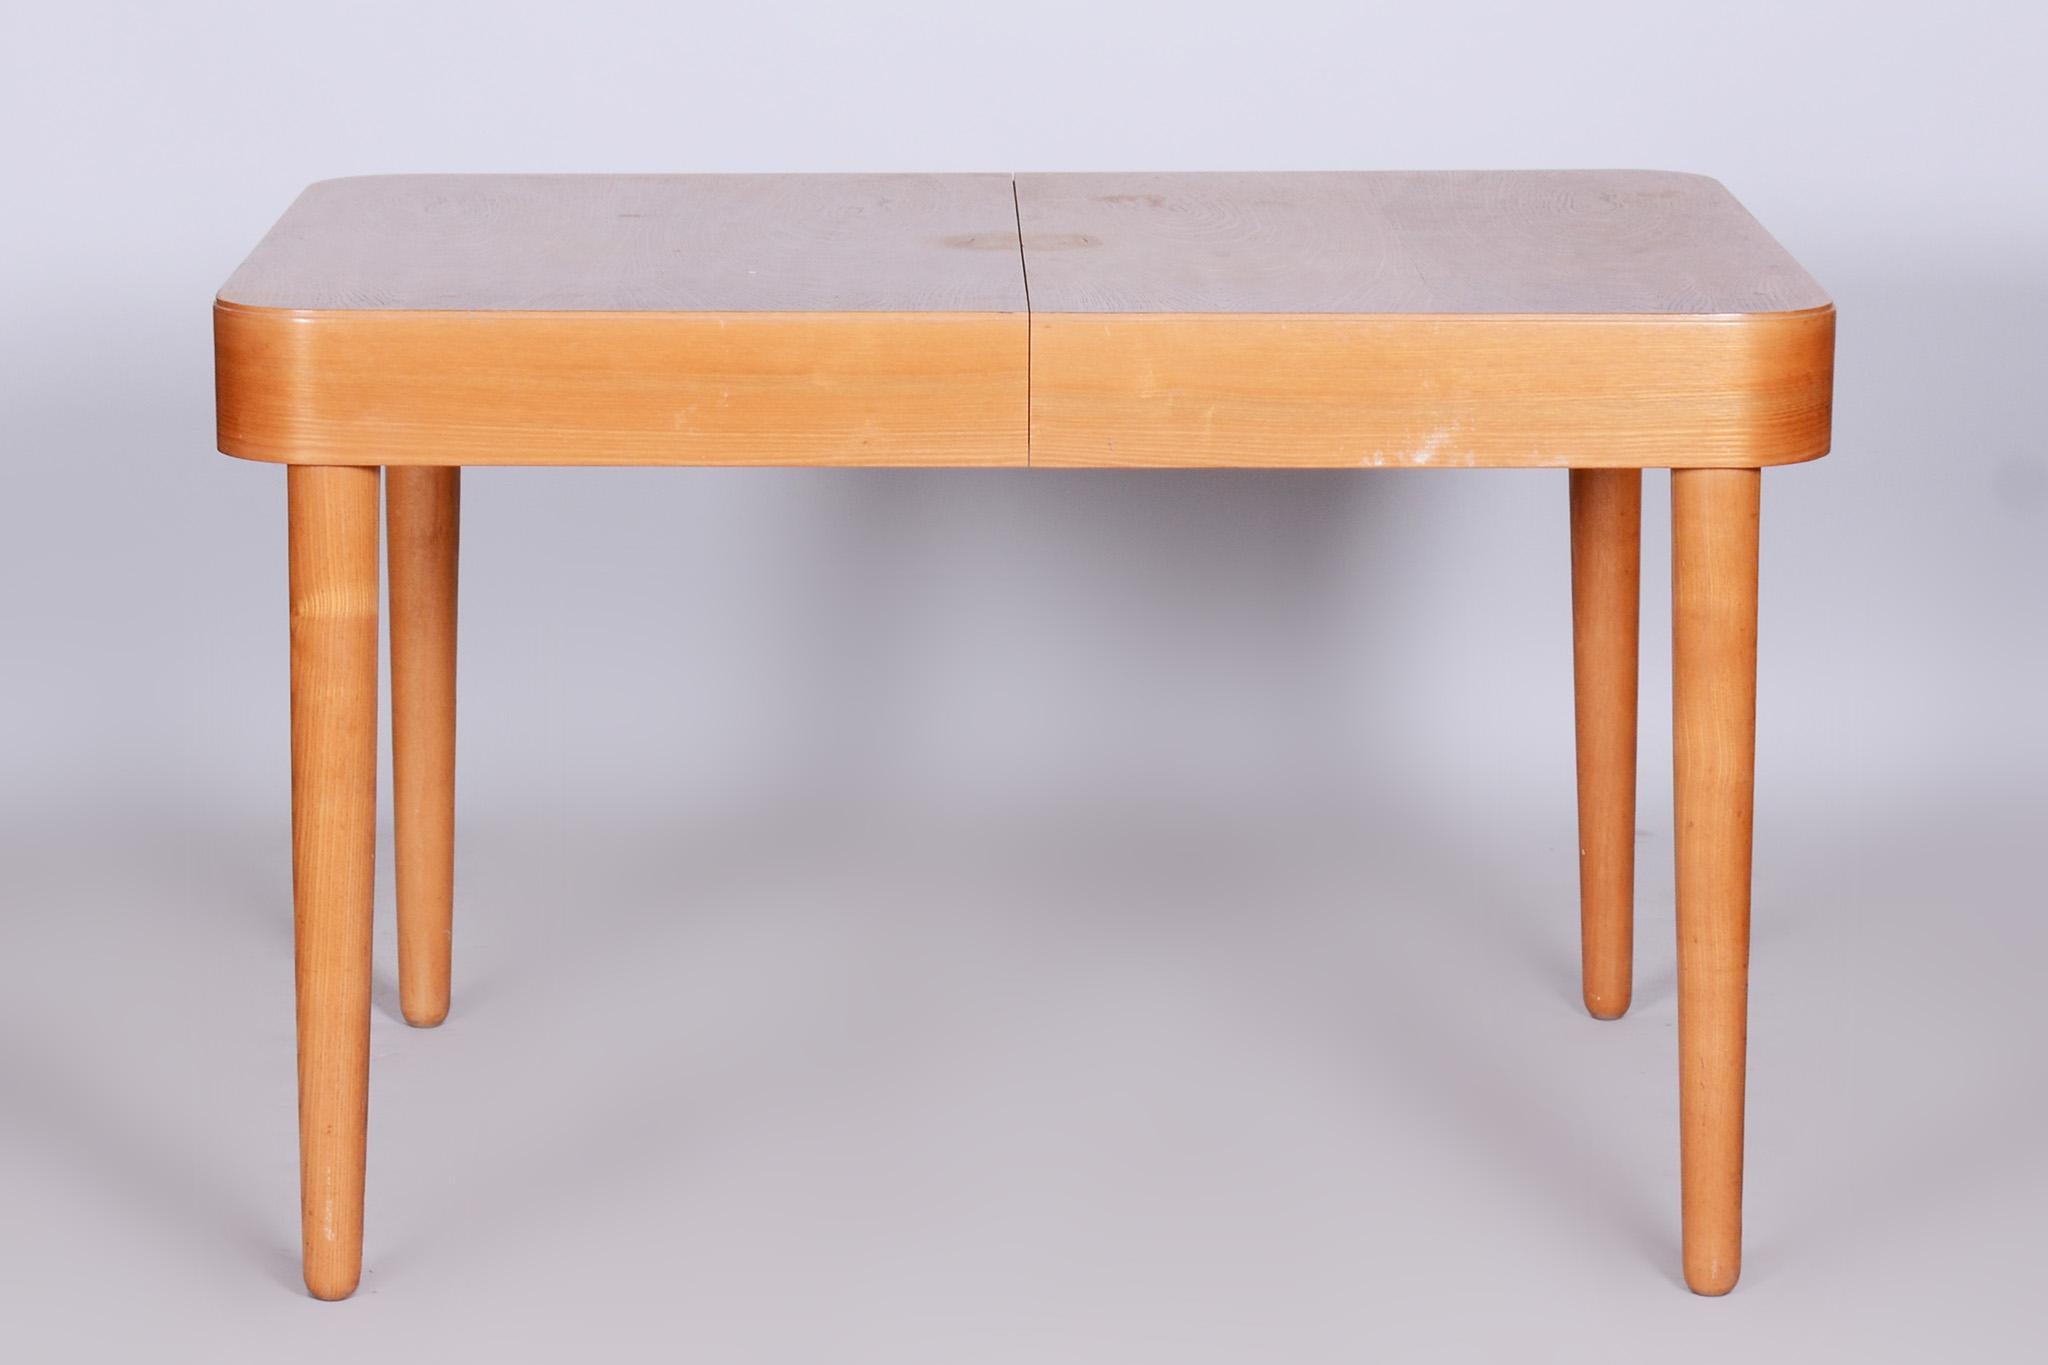 Restored midcentury dining table. 

Maker: ÚLUV - Center for Folk Art Production
Period: 1950-1959
Source: Czechia
Material: Ash

Very well-preserved condition.
Revived polish.
 